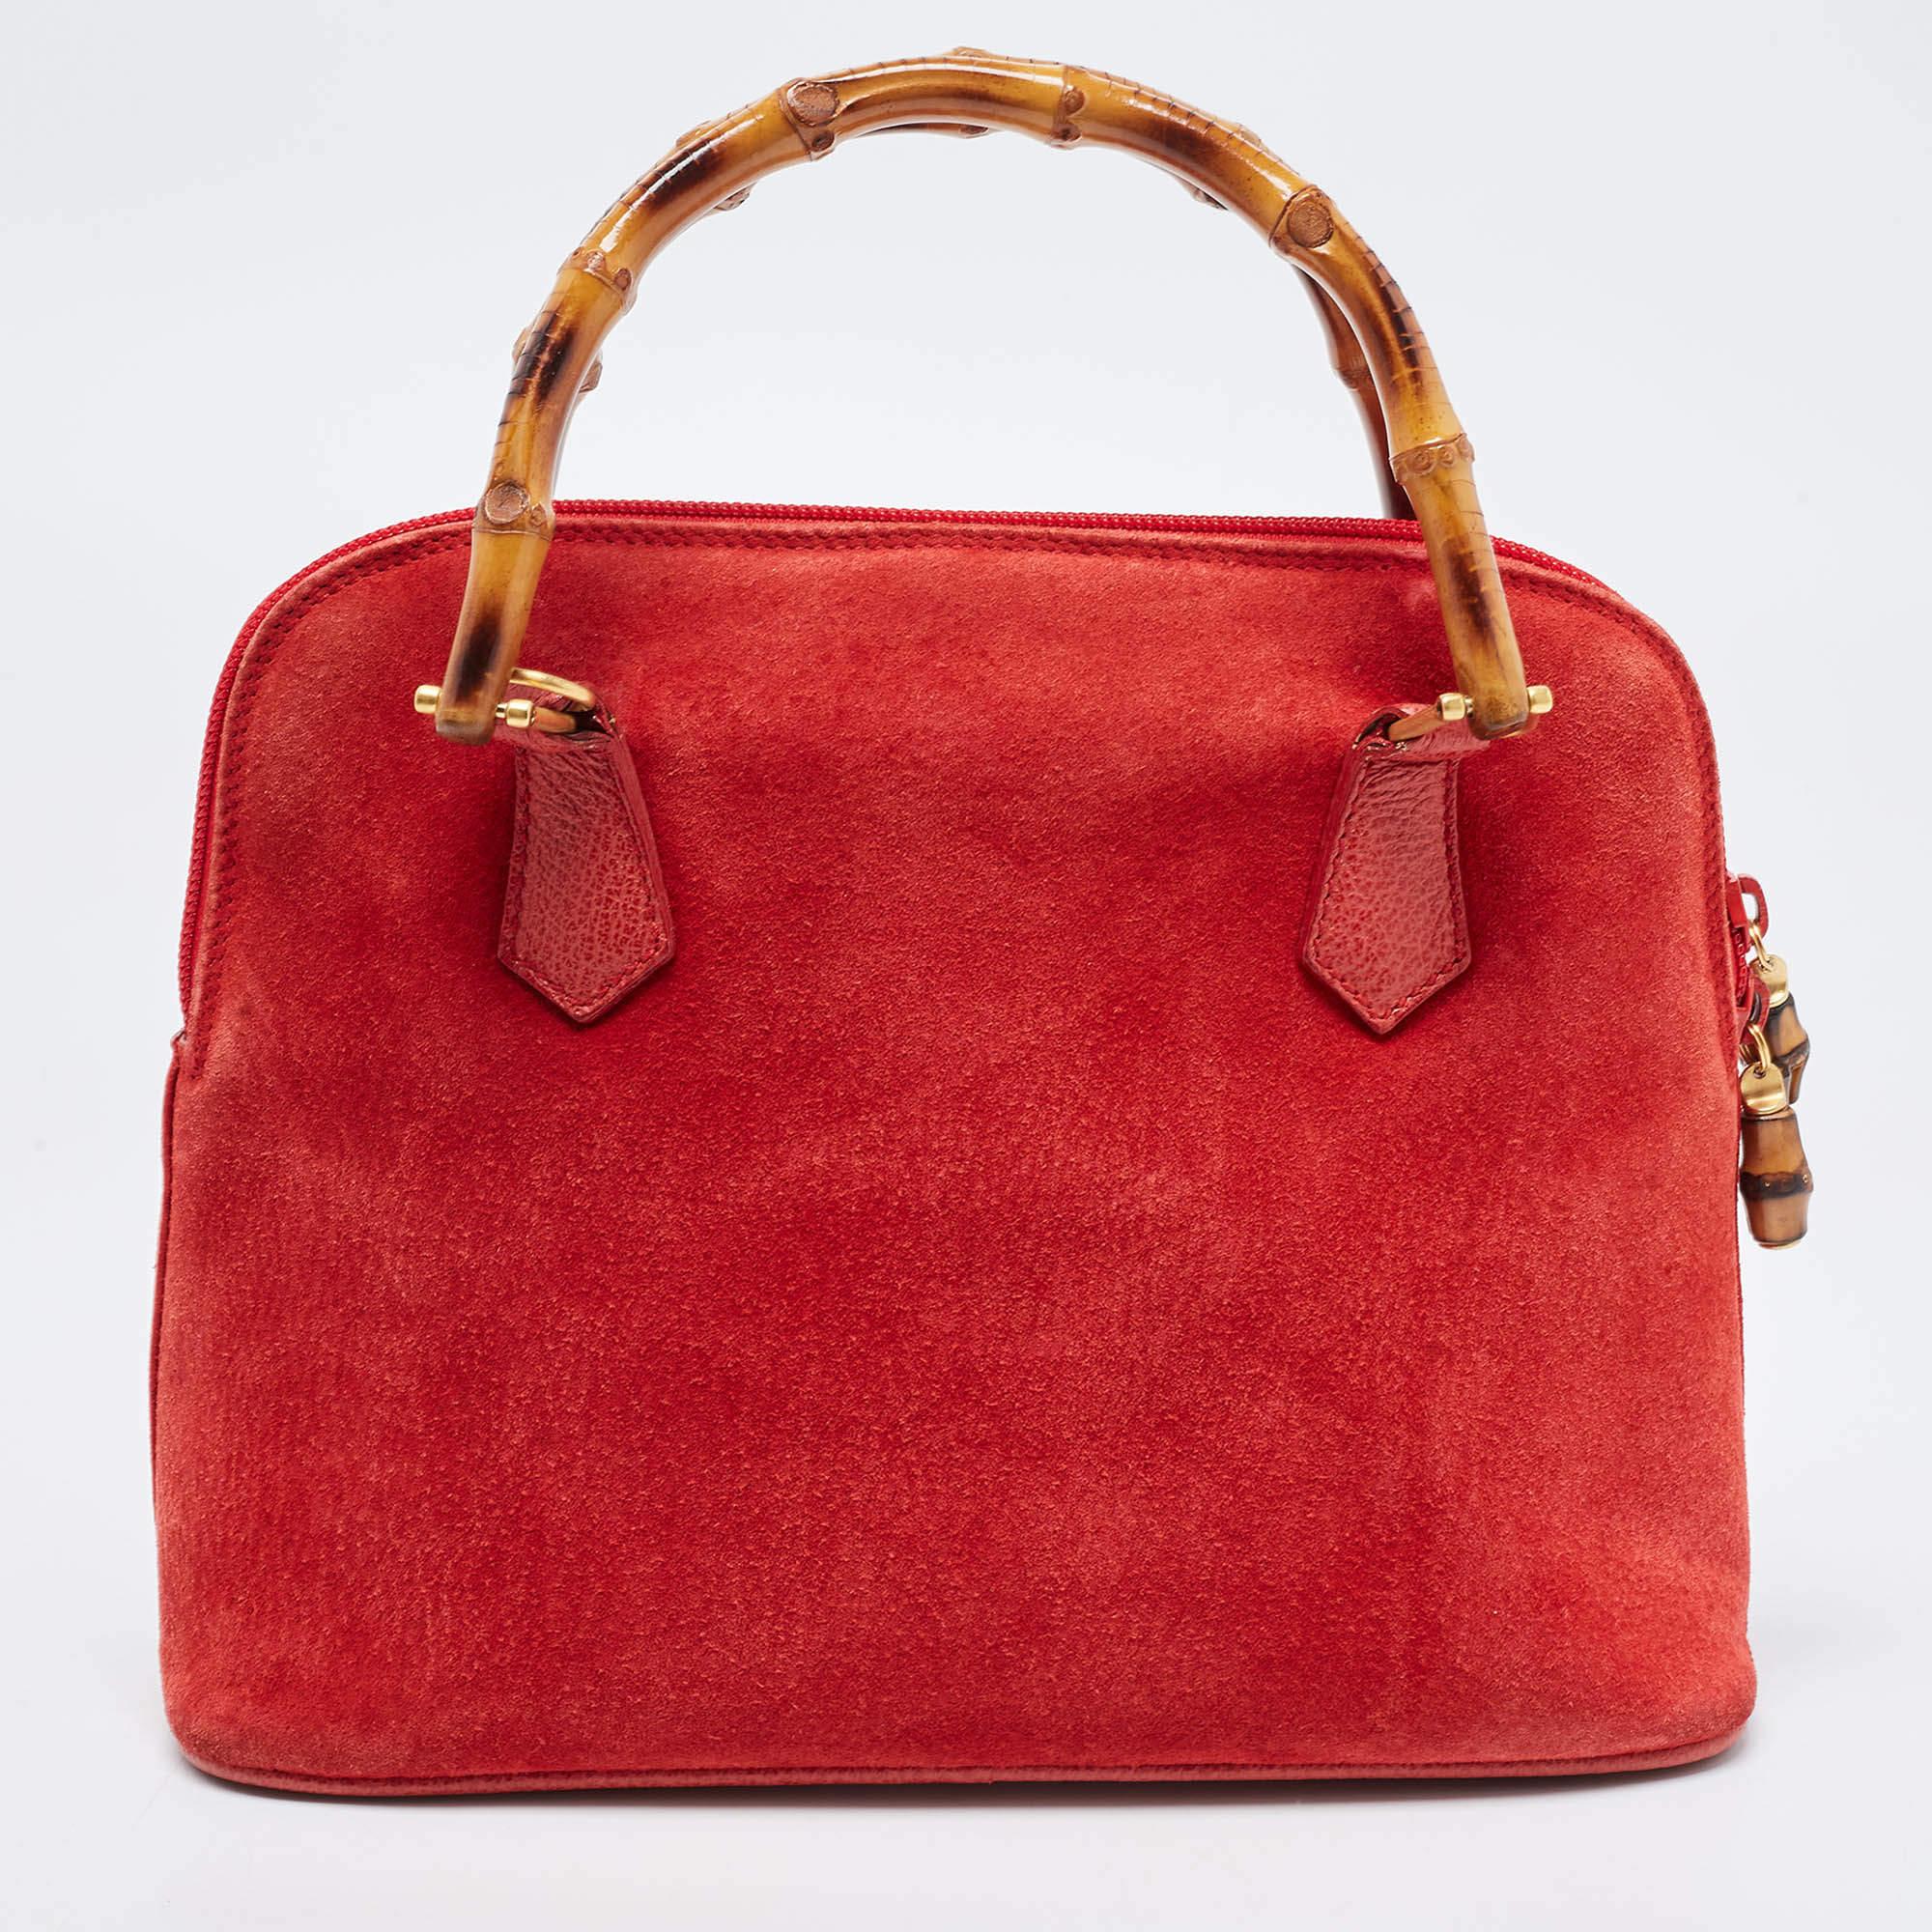 Gucci Red Suede and Leather Bamboo Handle Satchel 2